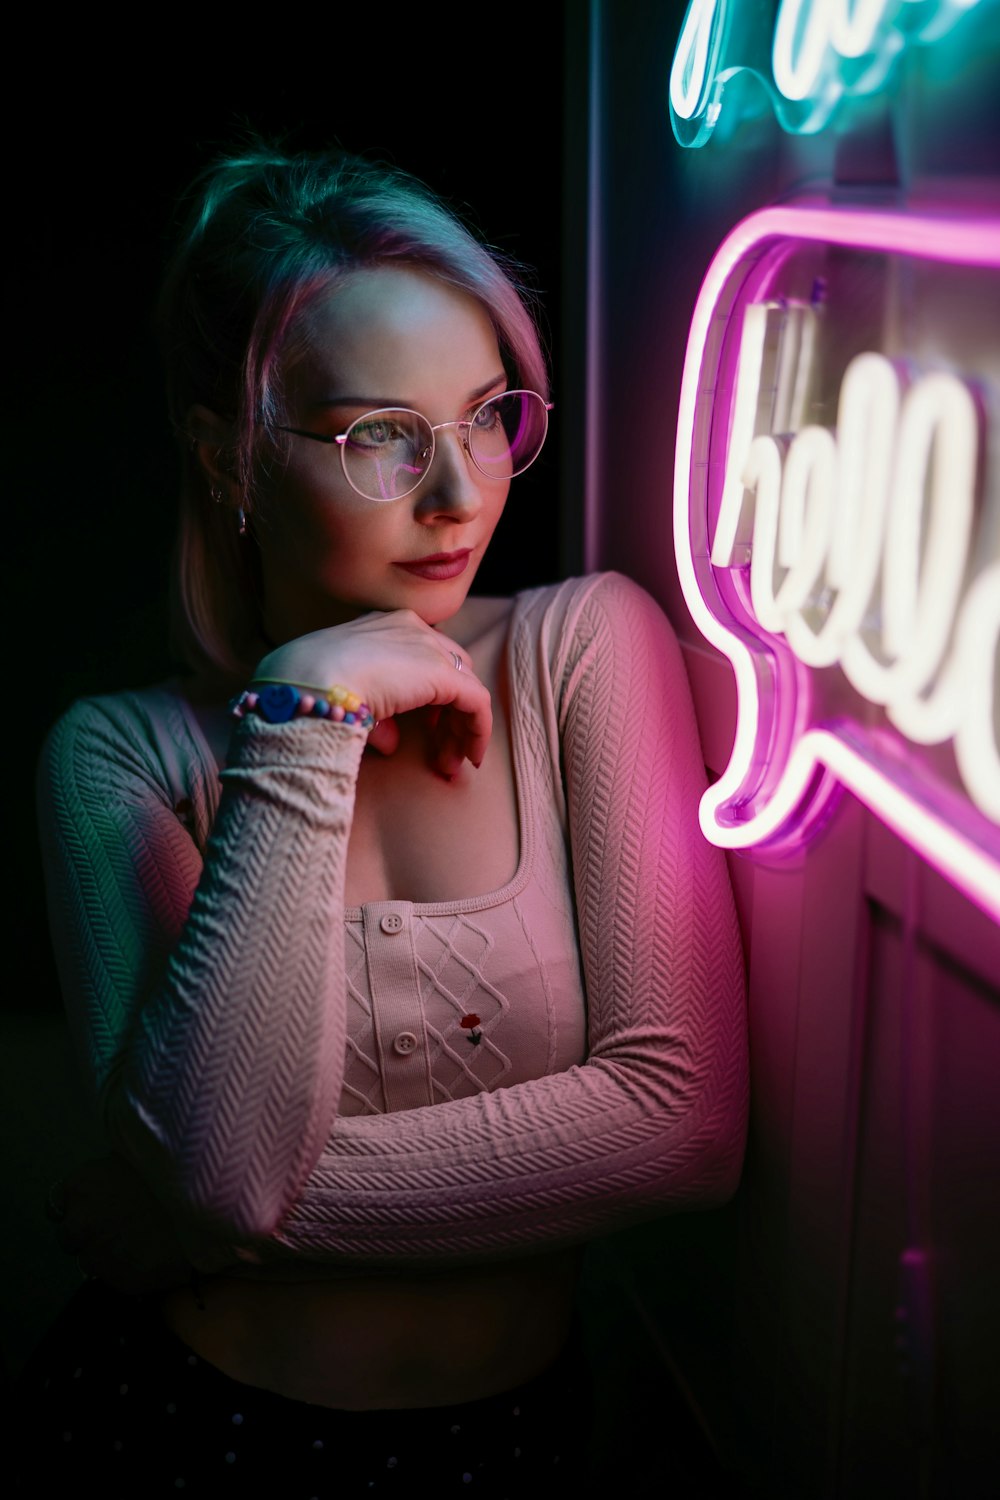 a woman wearing glasses standing in front of a neon sign